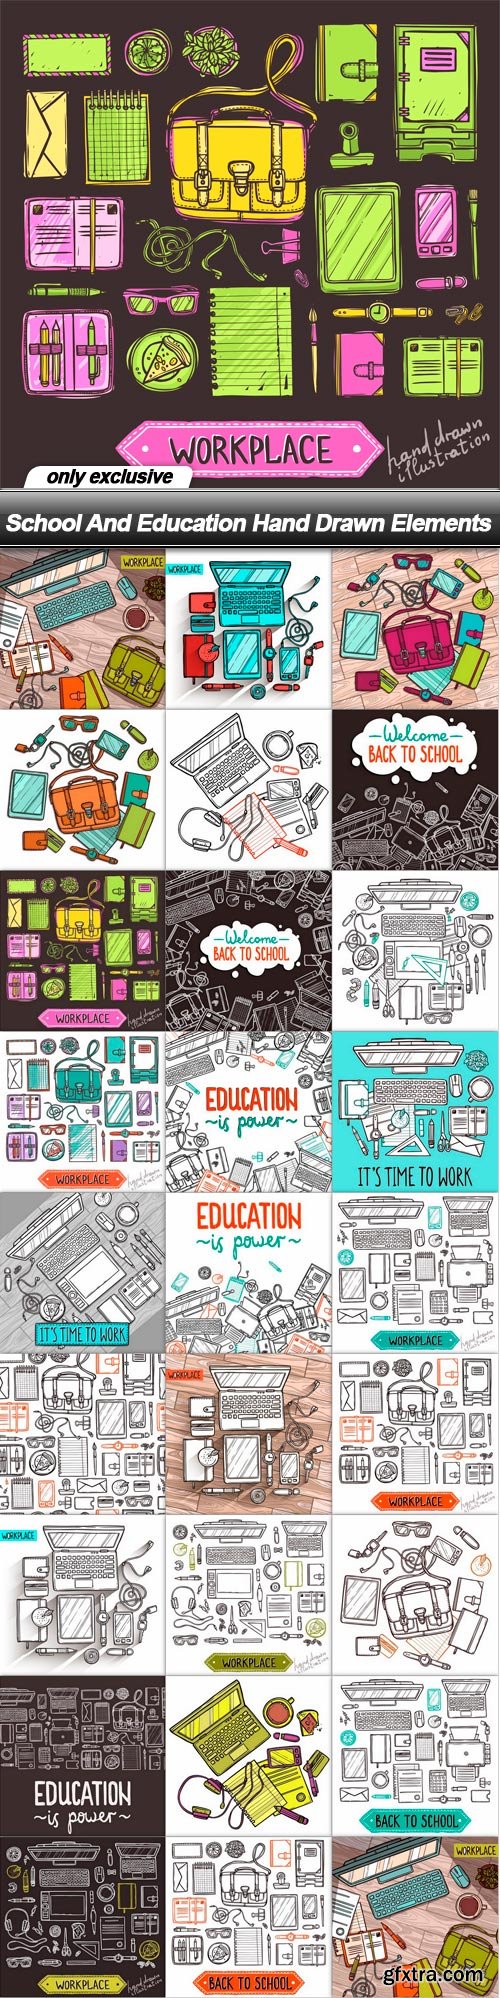 School And Education Hand Drawn Elements - 26 EPS